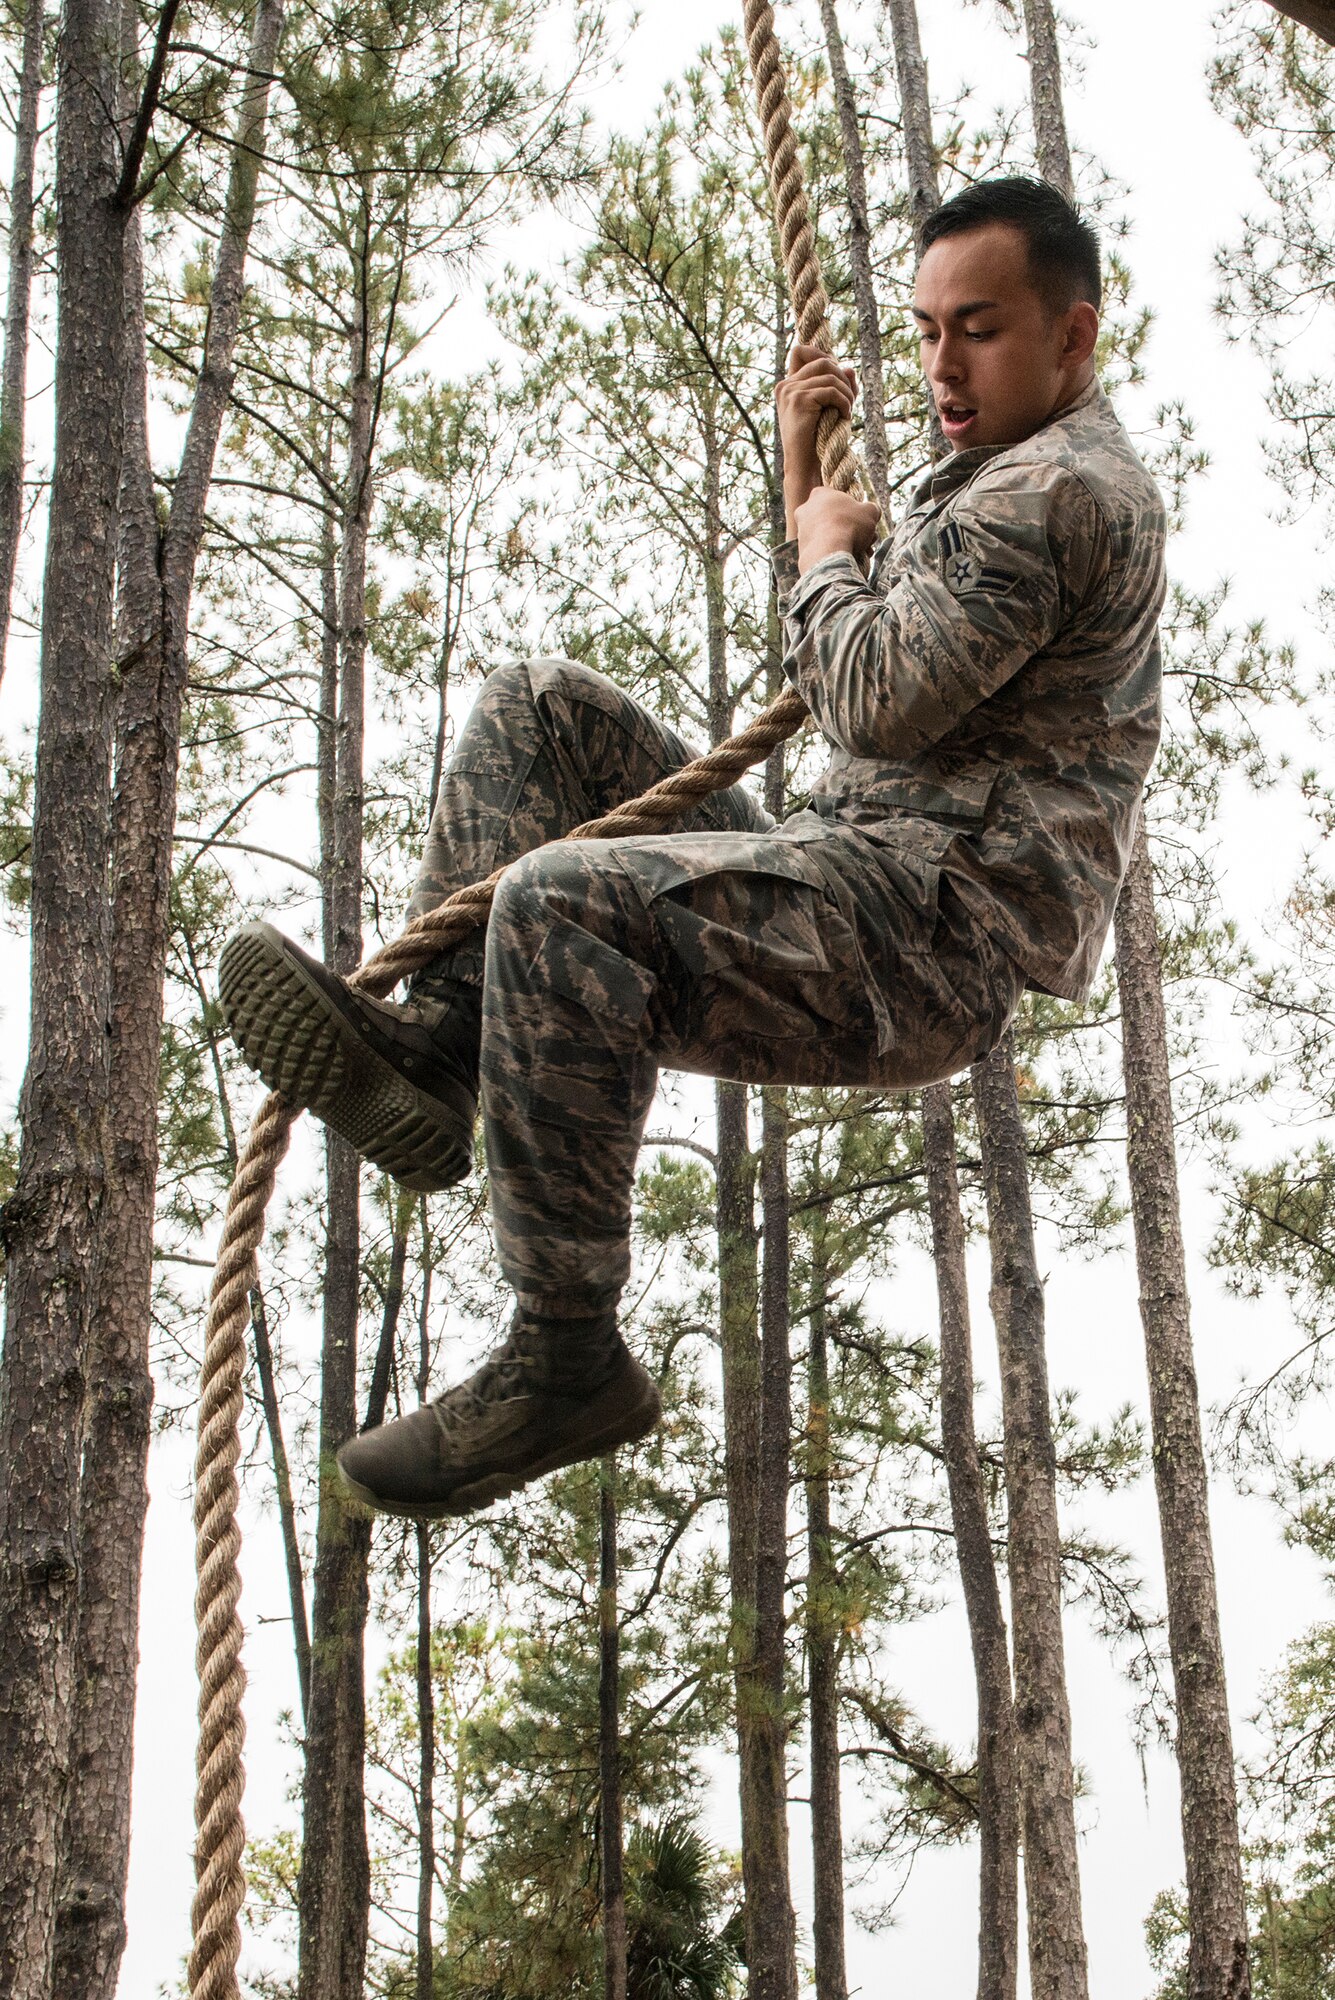 U.S. Air Force Airman 1st Class Cristian Ring, 820th Base Defense Group fireteam member, climbs a rope as part of an obstacle course during an air assault assessment, Dec. 15, 2015, at Camp Blanding, Fla. Airmen had two attempts to climb the rope and pull themselves onto the tower in order to pass the obstacle course. (U.S. Air Force photo by Airman 1st Class Lauren M. Johnson/Released)